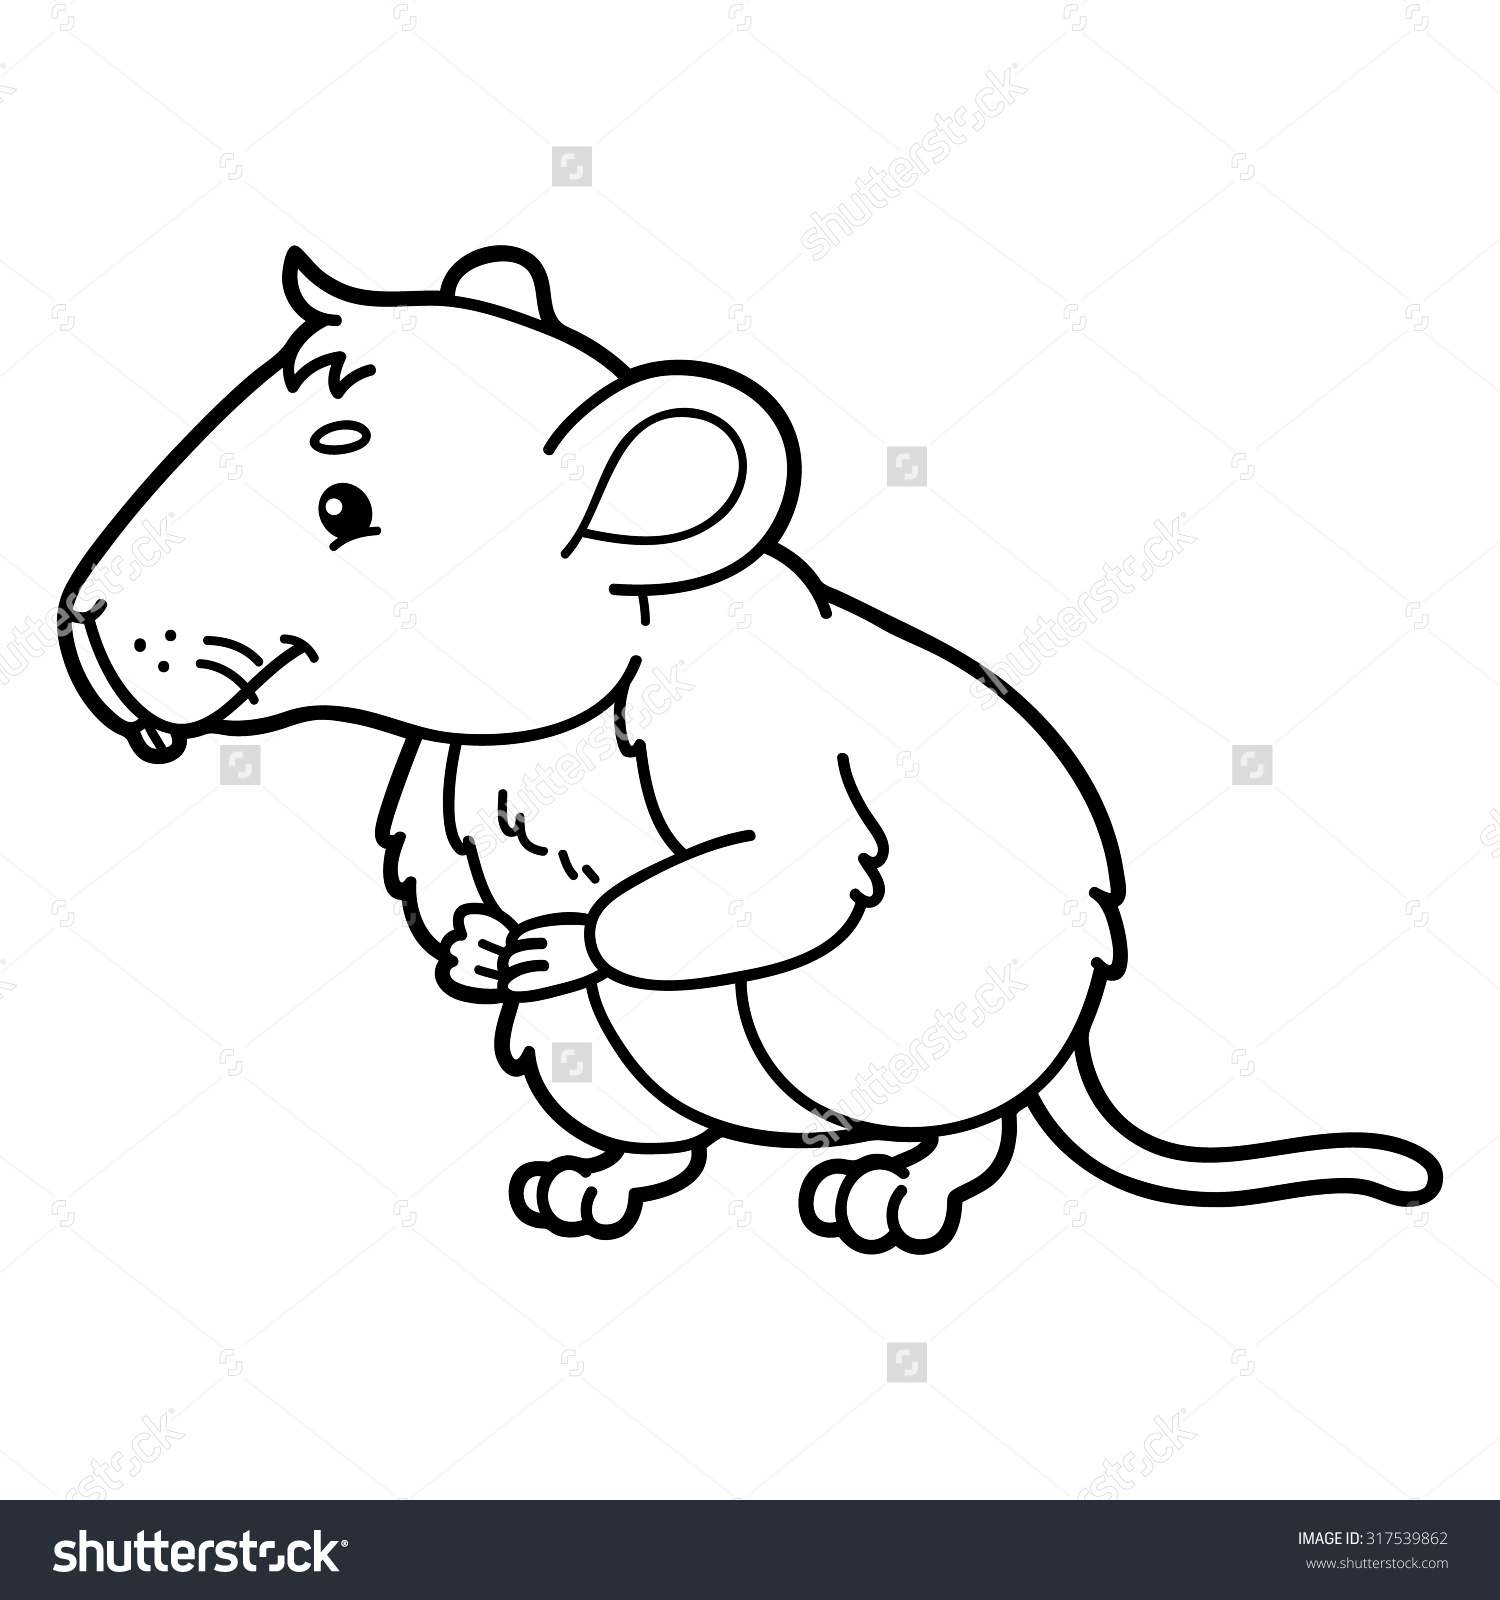 Vole clipart #3, Download drawings